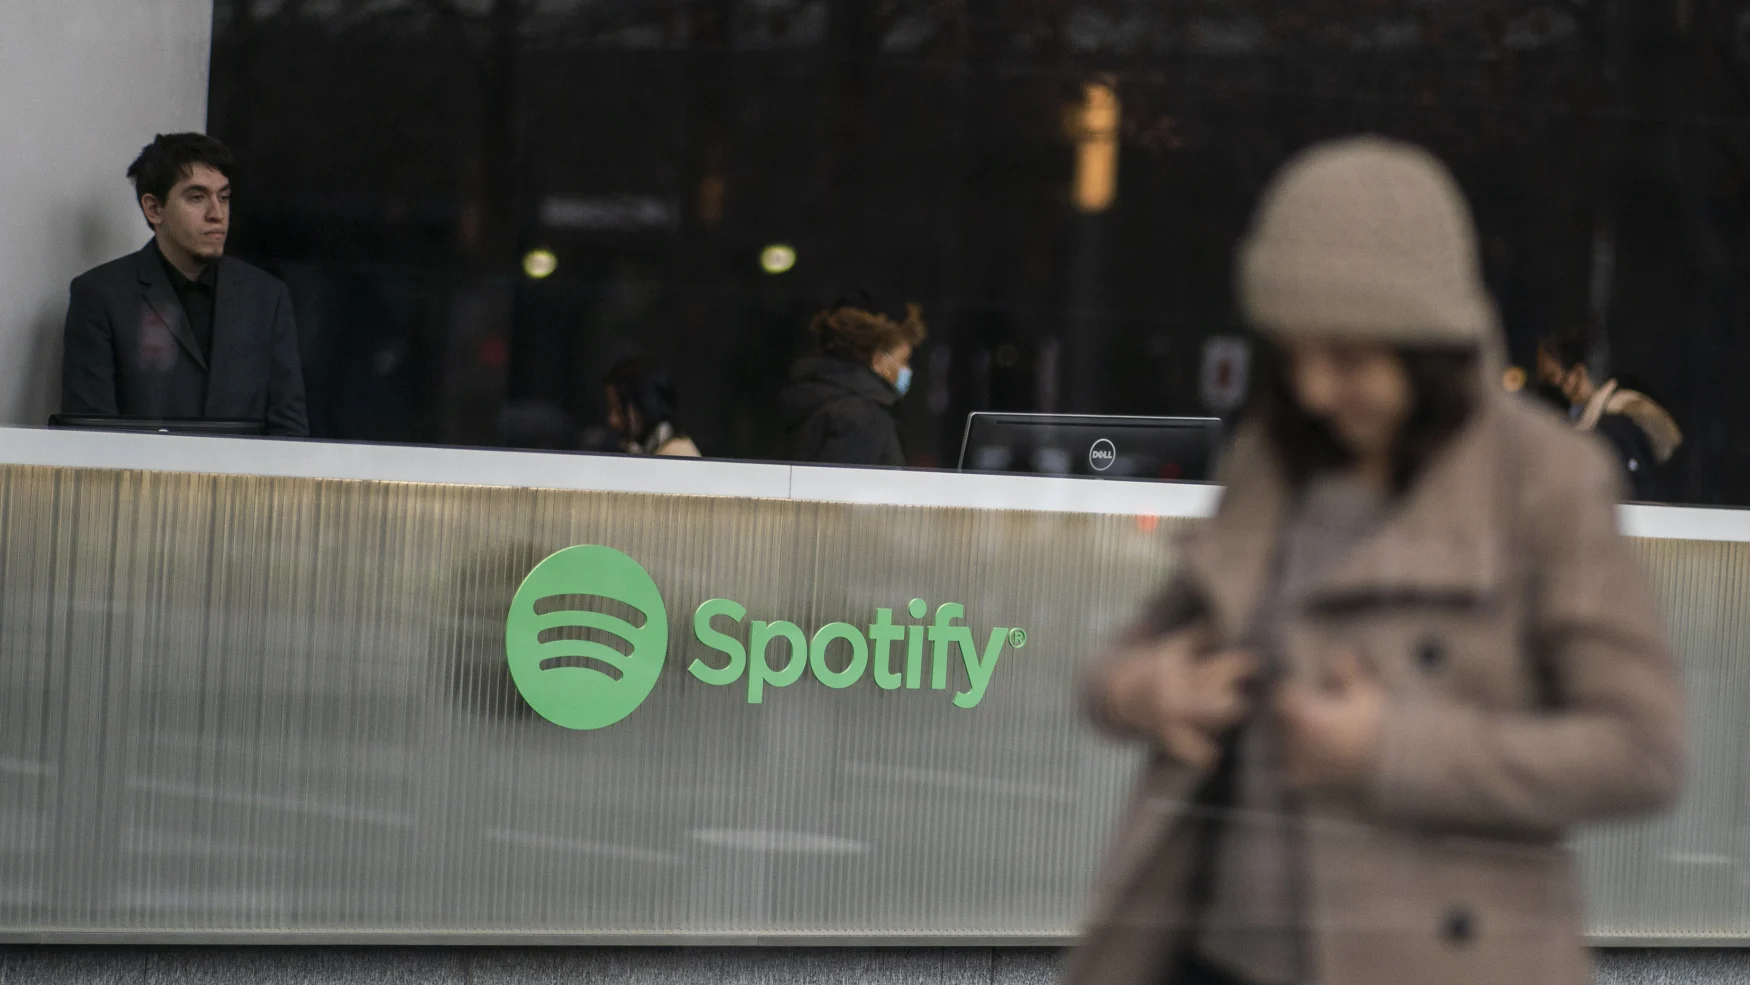 NEW YORK, NEW YORK - JANUARY 23: People are seen inside the Spotify headquarters building in Lower Manhattan on January 23, 2023 in New York City. Spotify announced Monday they will be cutting 6% of its global workforce. (Photo by Eduardo MunozAlvarez/VIEWpress via Getty Images)